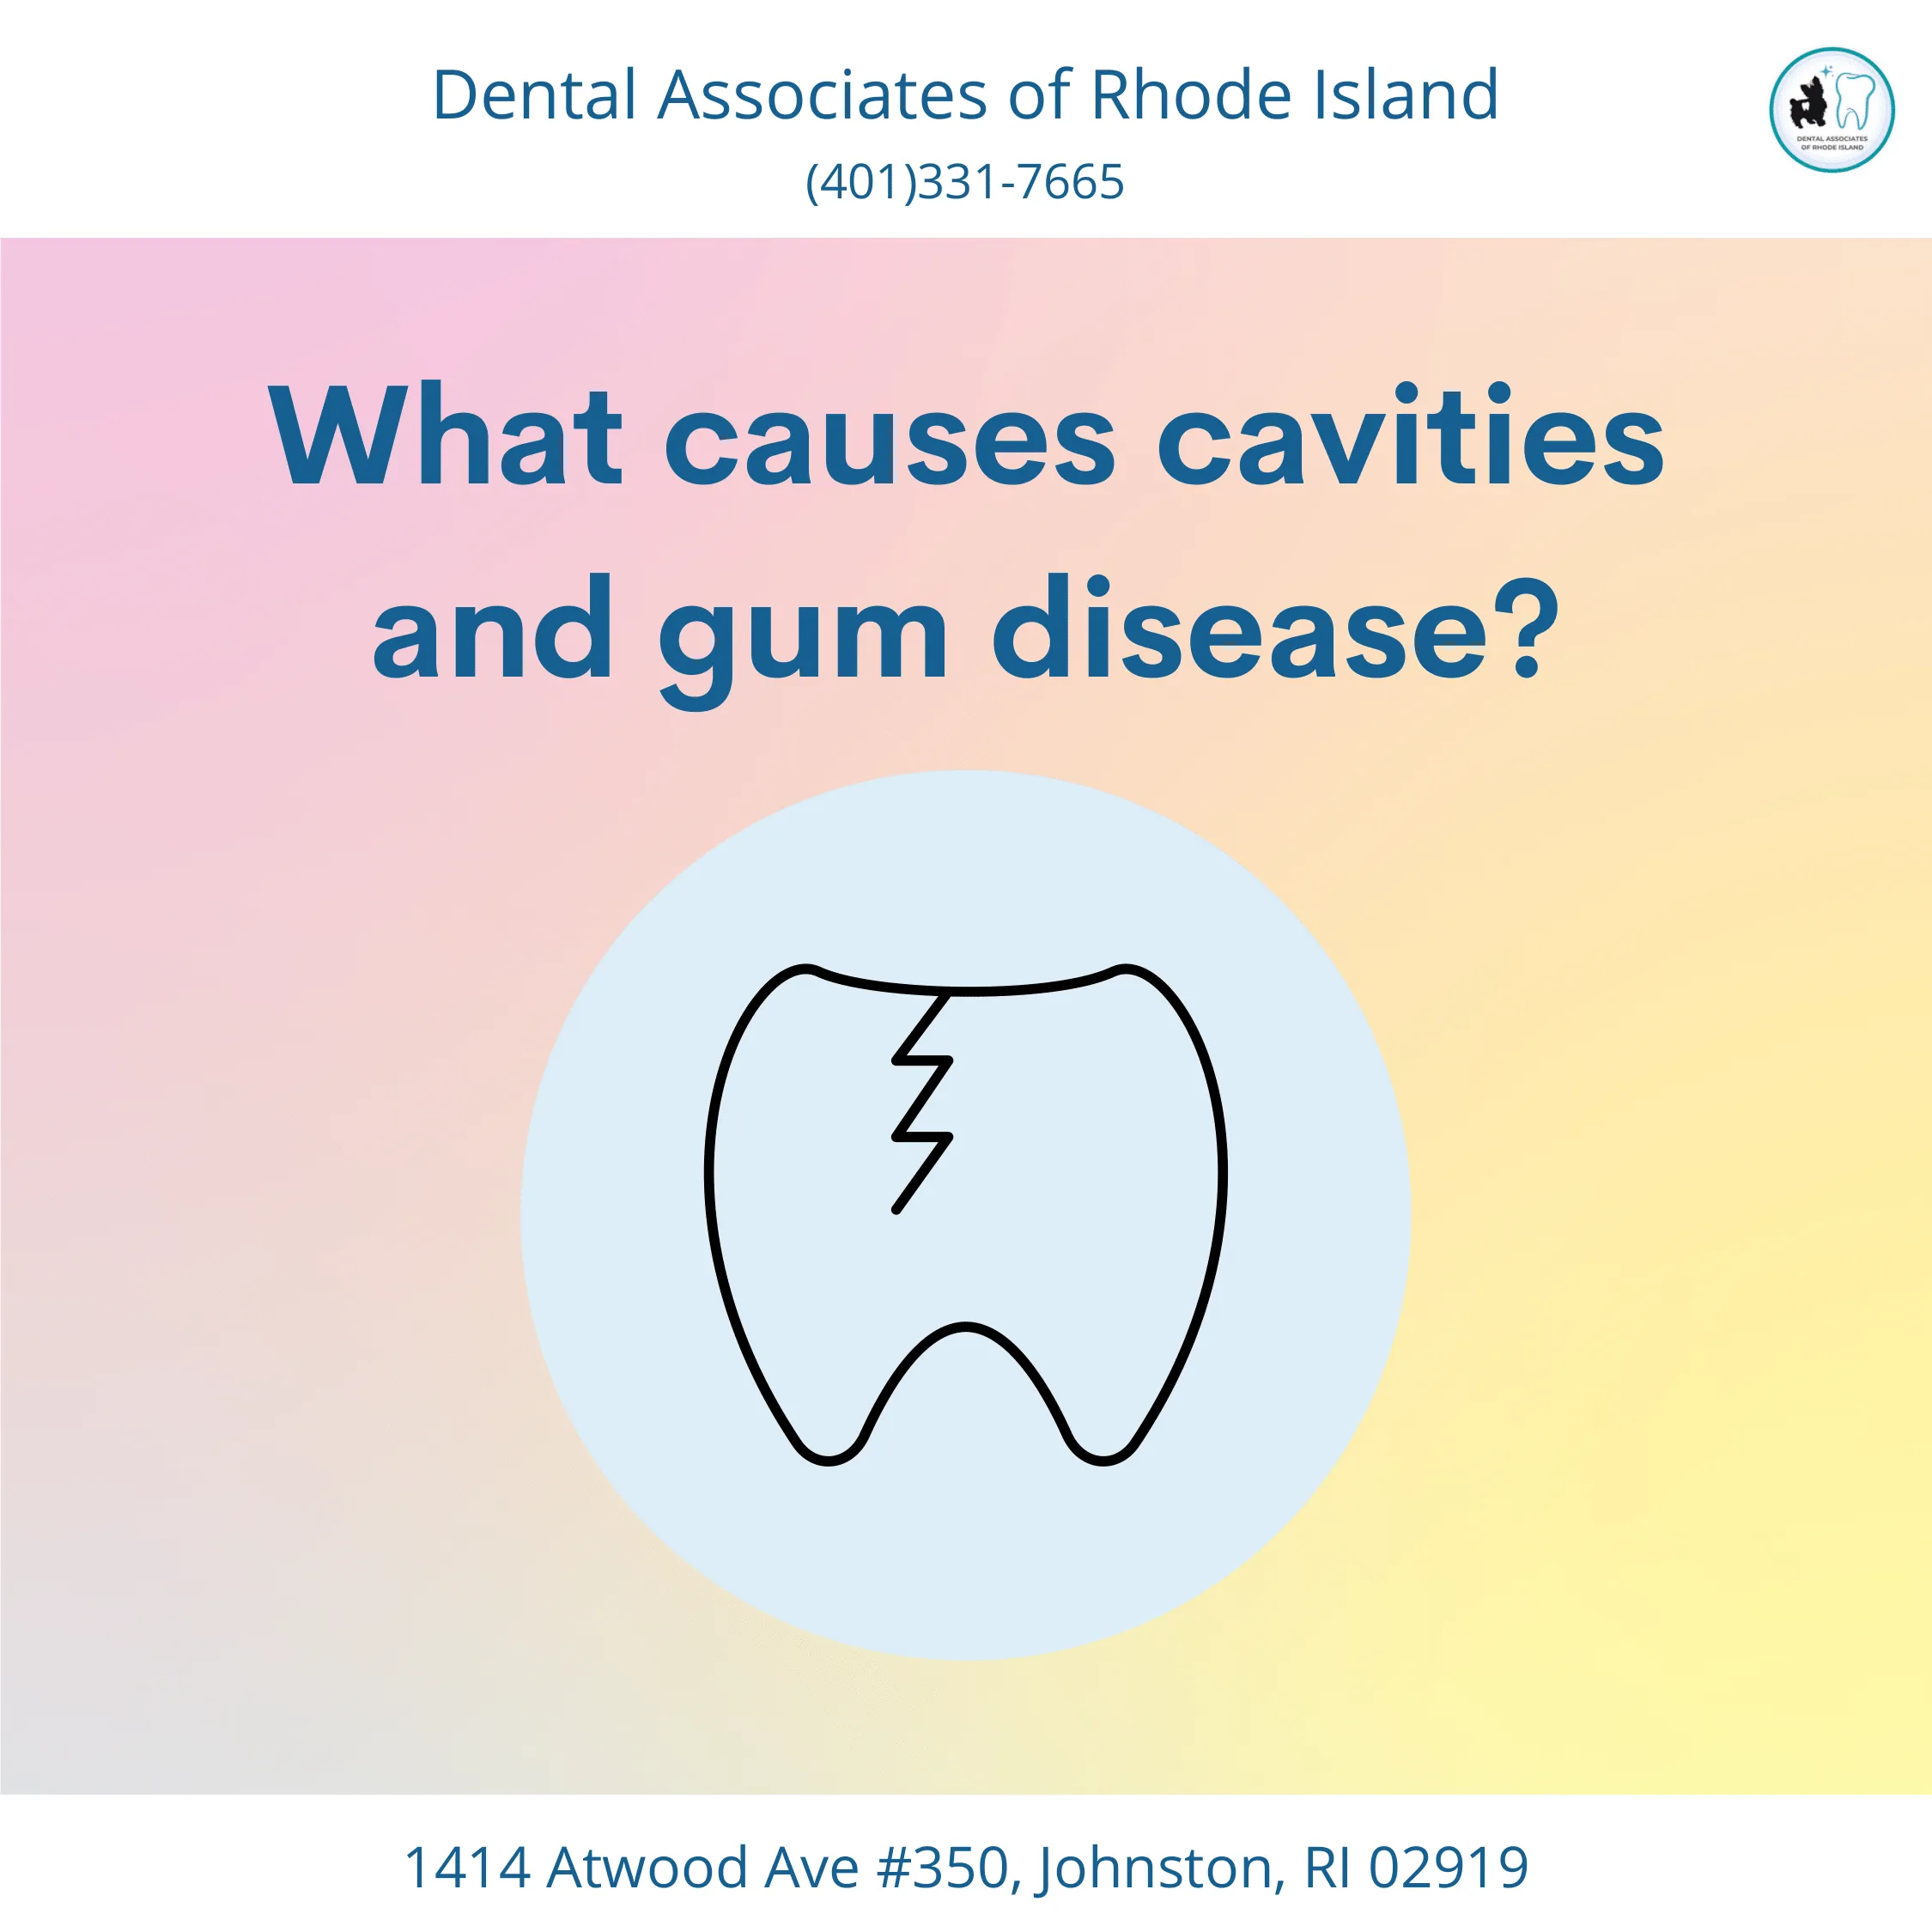 What causes Cavities and Gum Disease?